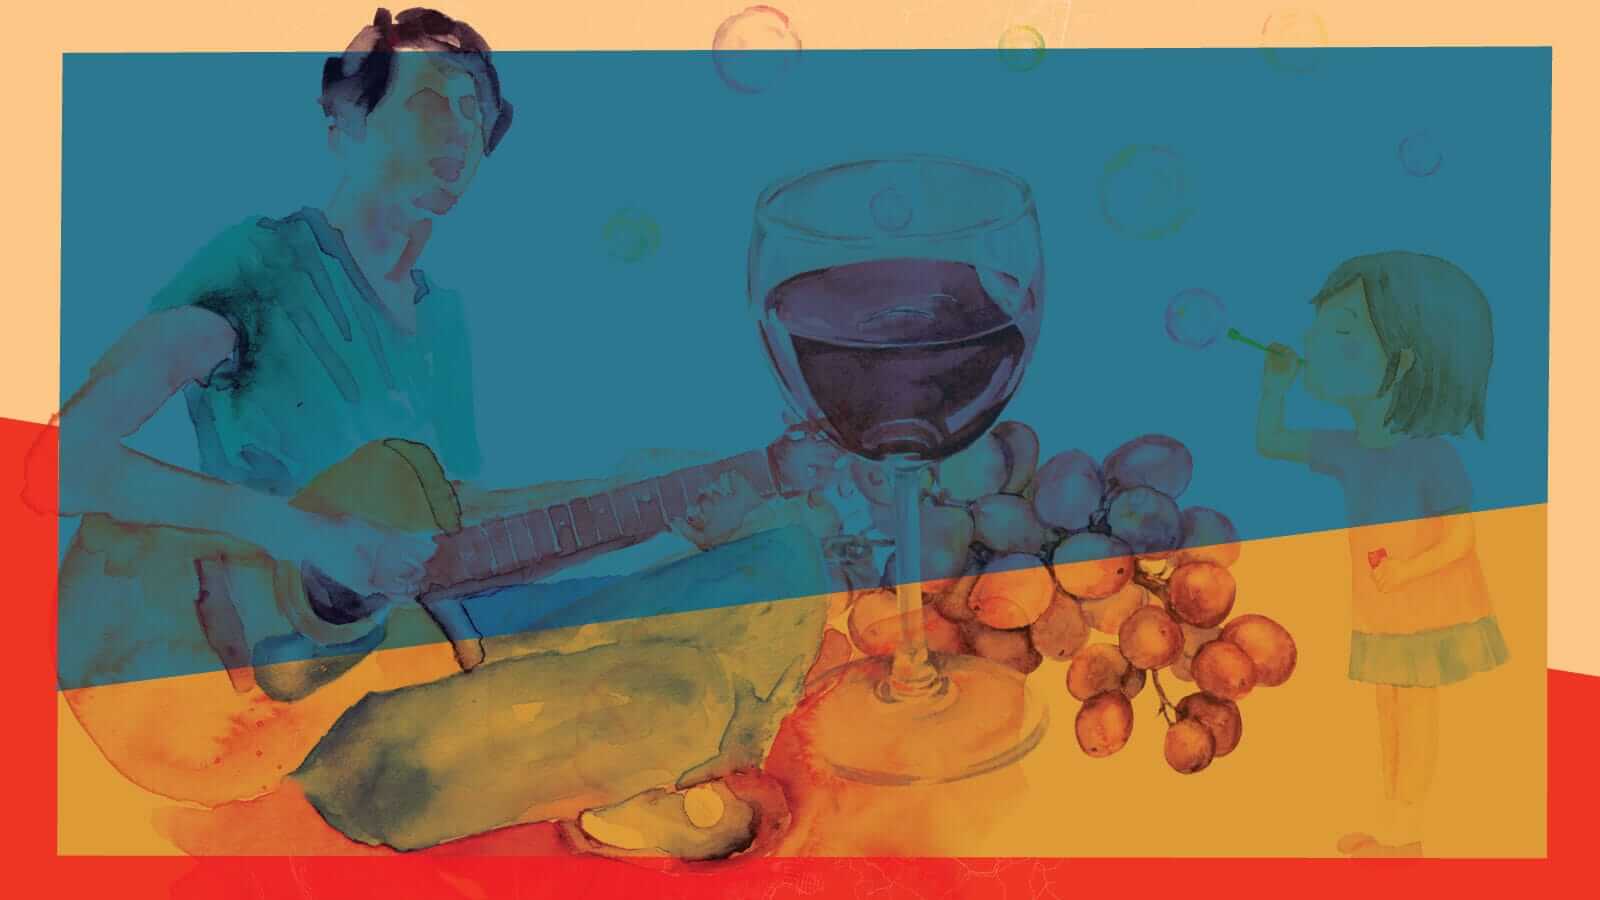 Image showing food, wine, a person playing guitar and child blowing bubbles